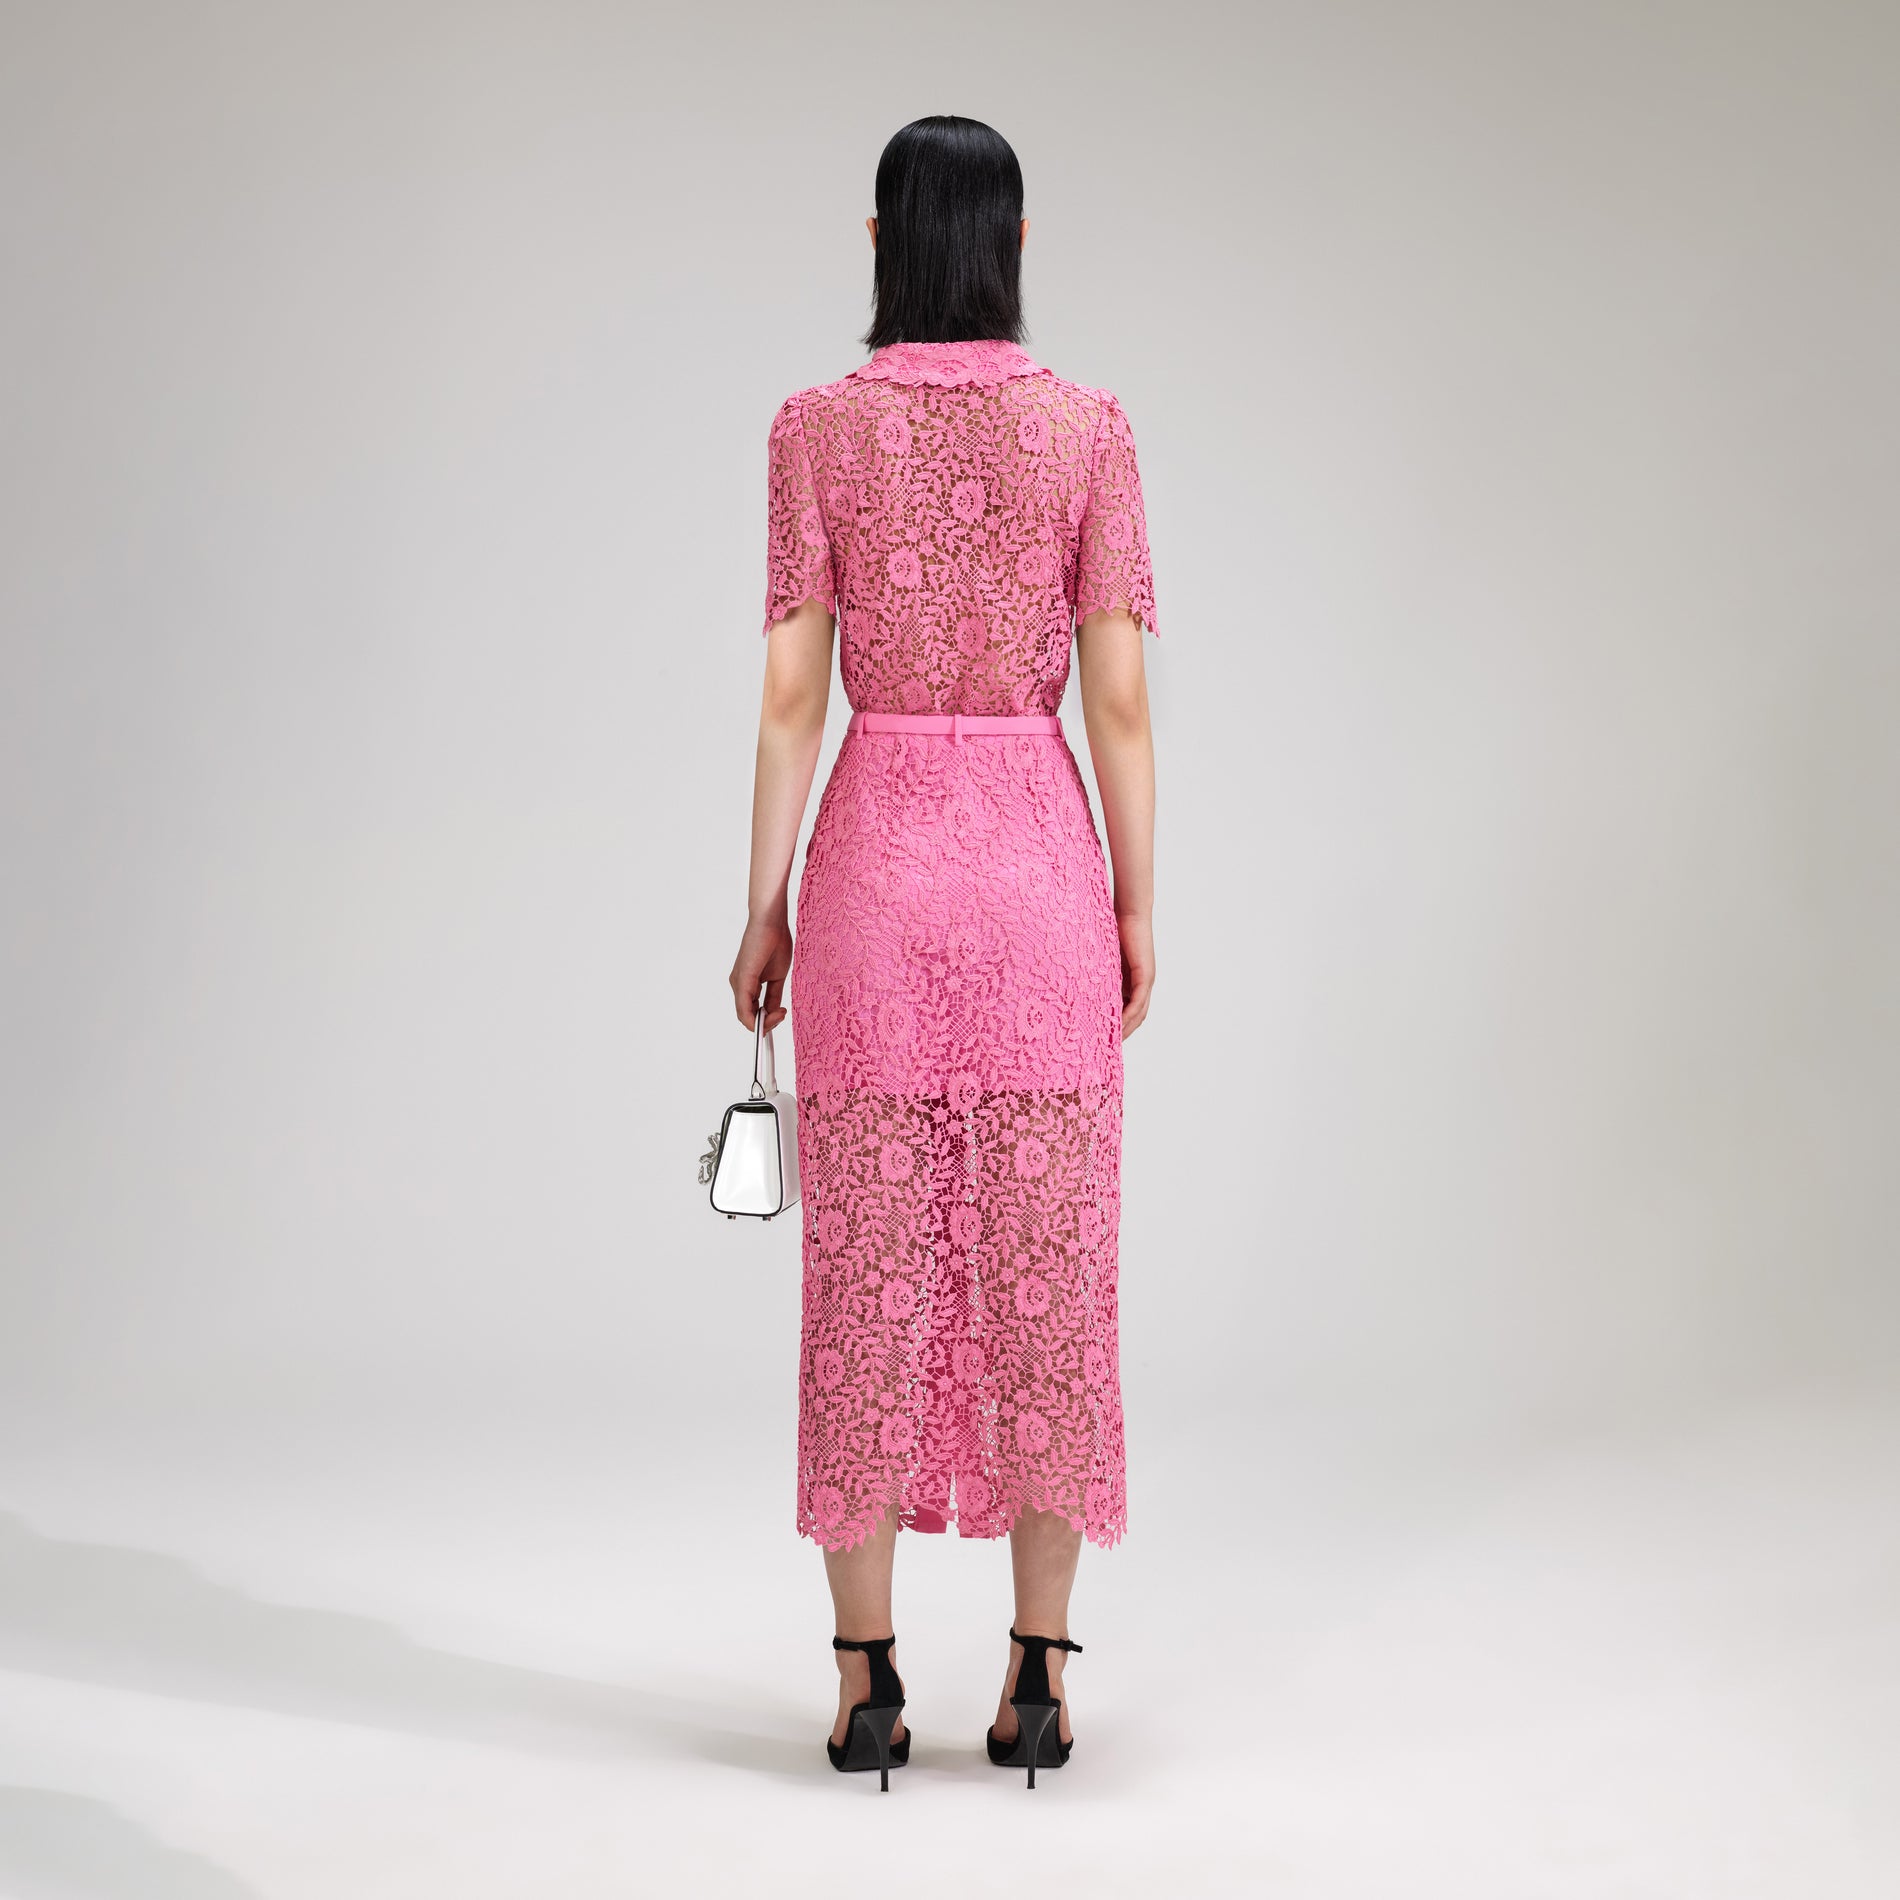 A woman wearing the Pink Rose Lace Midi Skirt